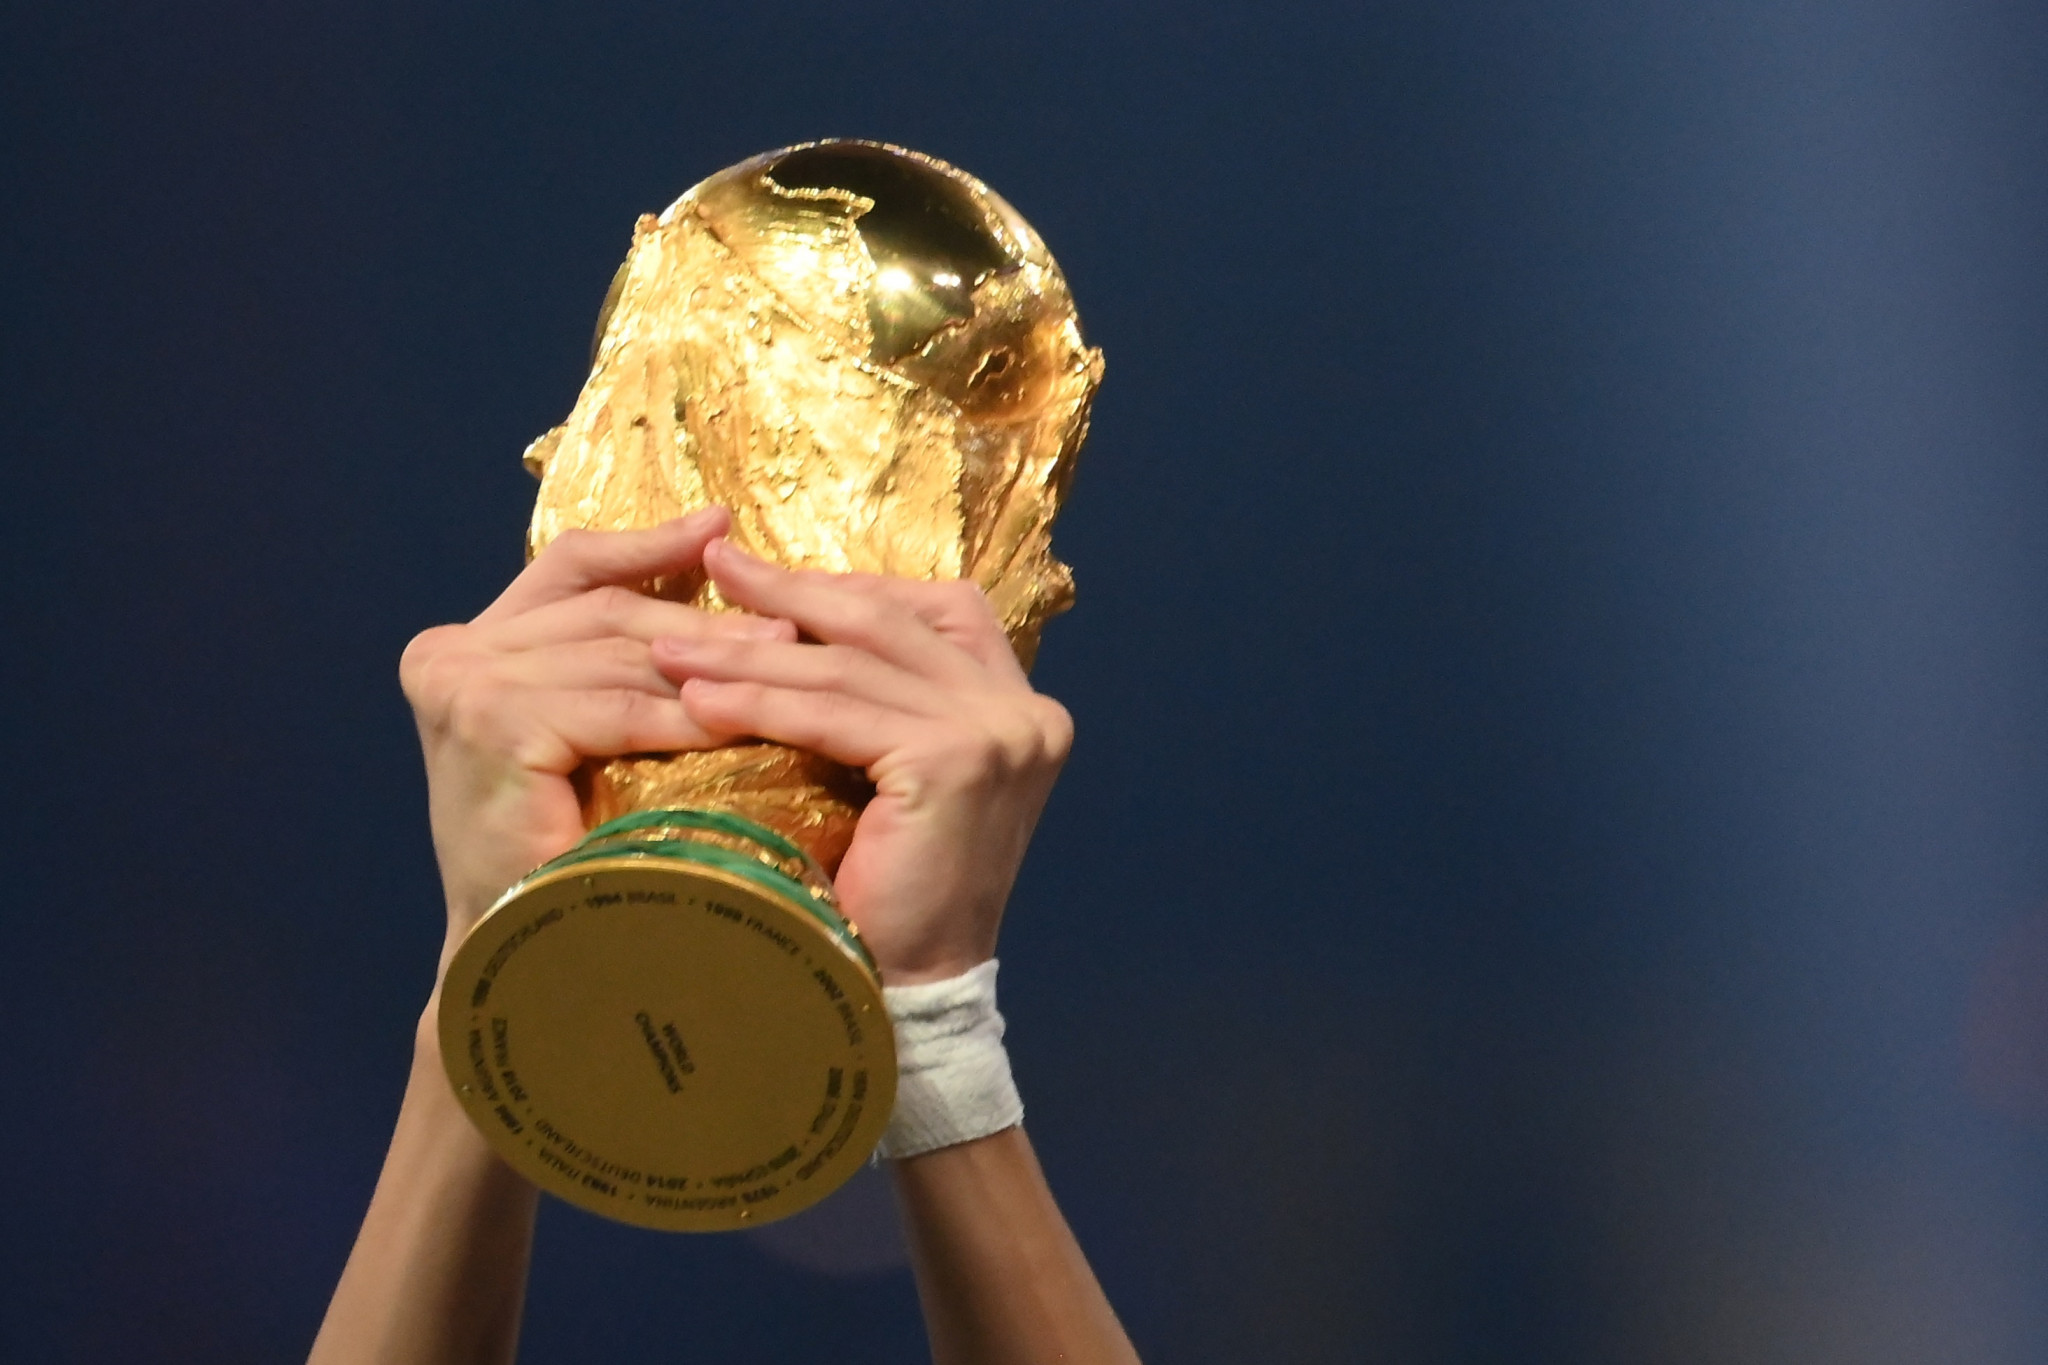 Human rights must be key to deciding 2030 FIFA World Cup host, survey says